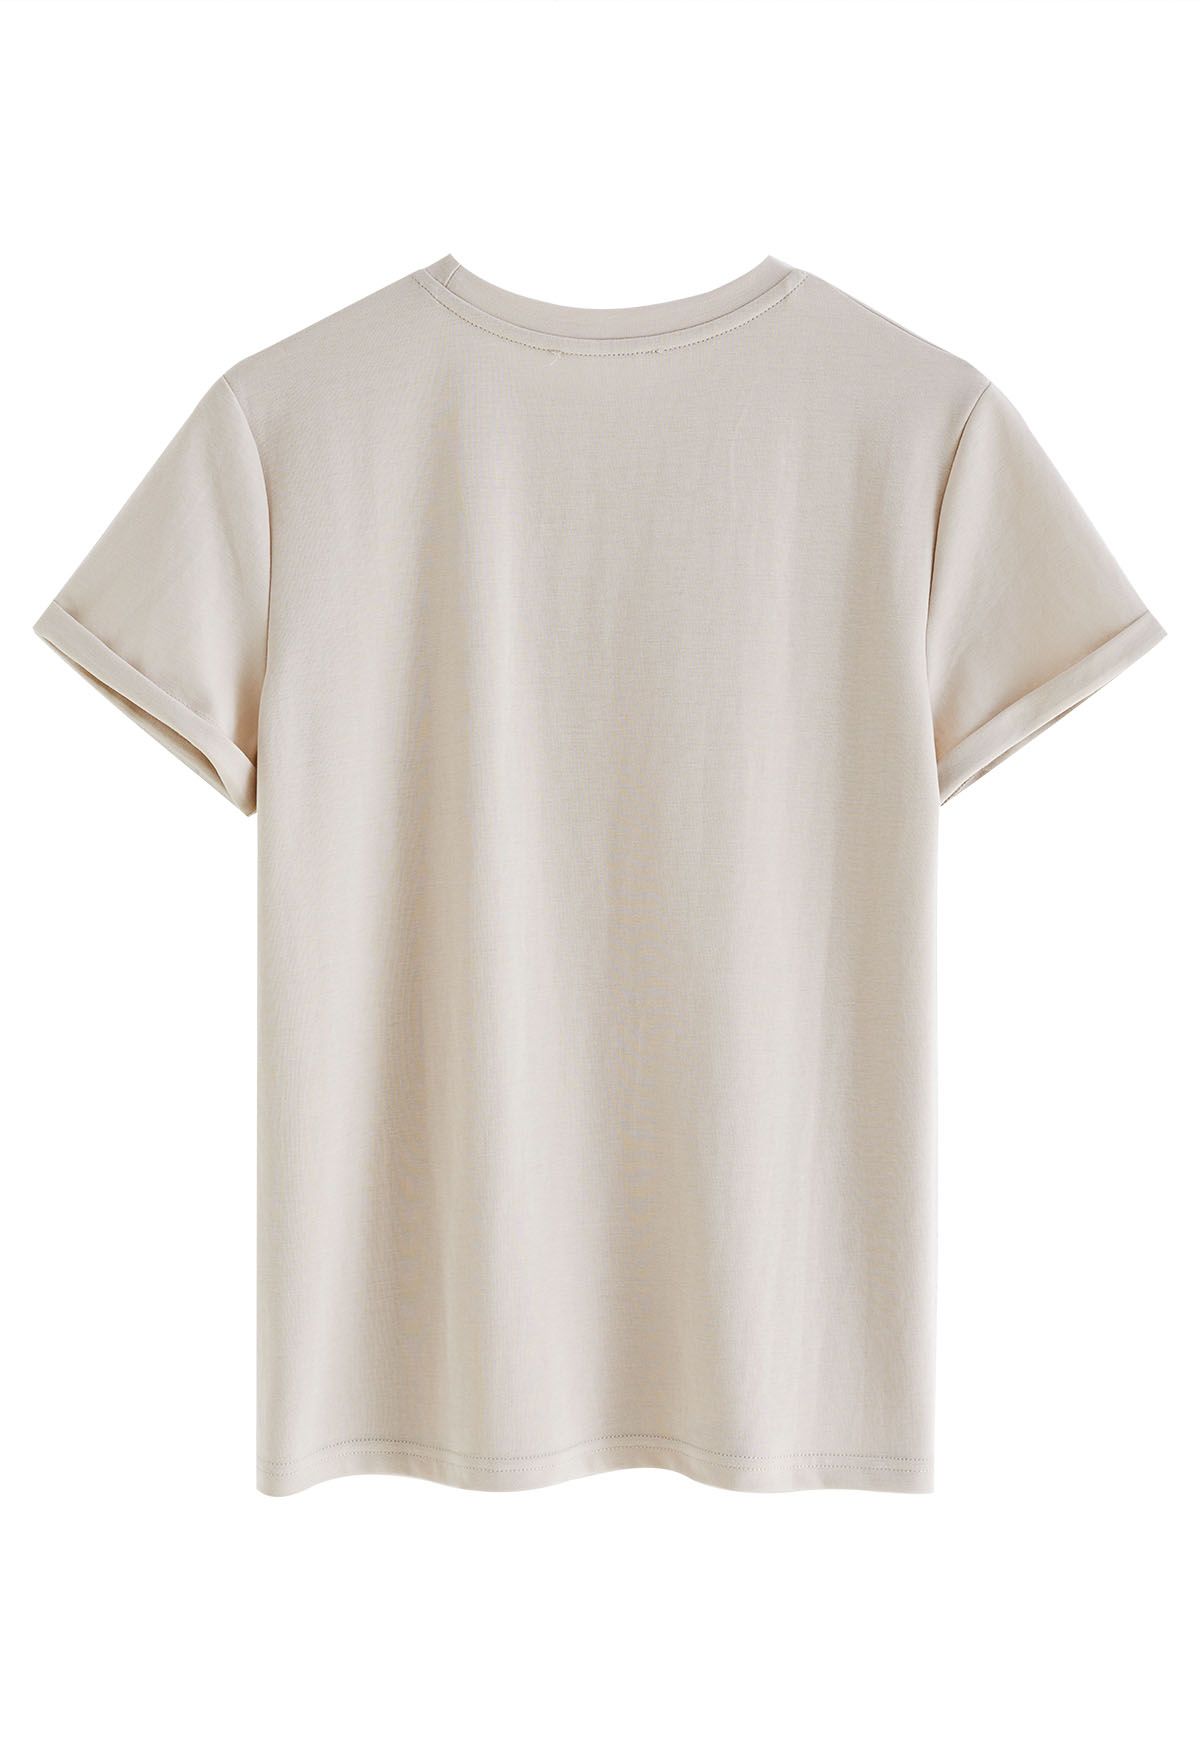 Classic Folded Cuffs Crew Neck T-Shirt in Oatmeal